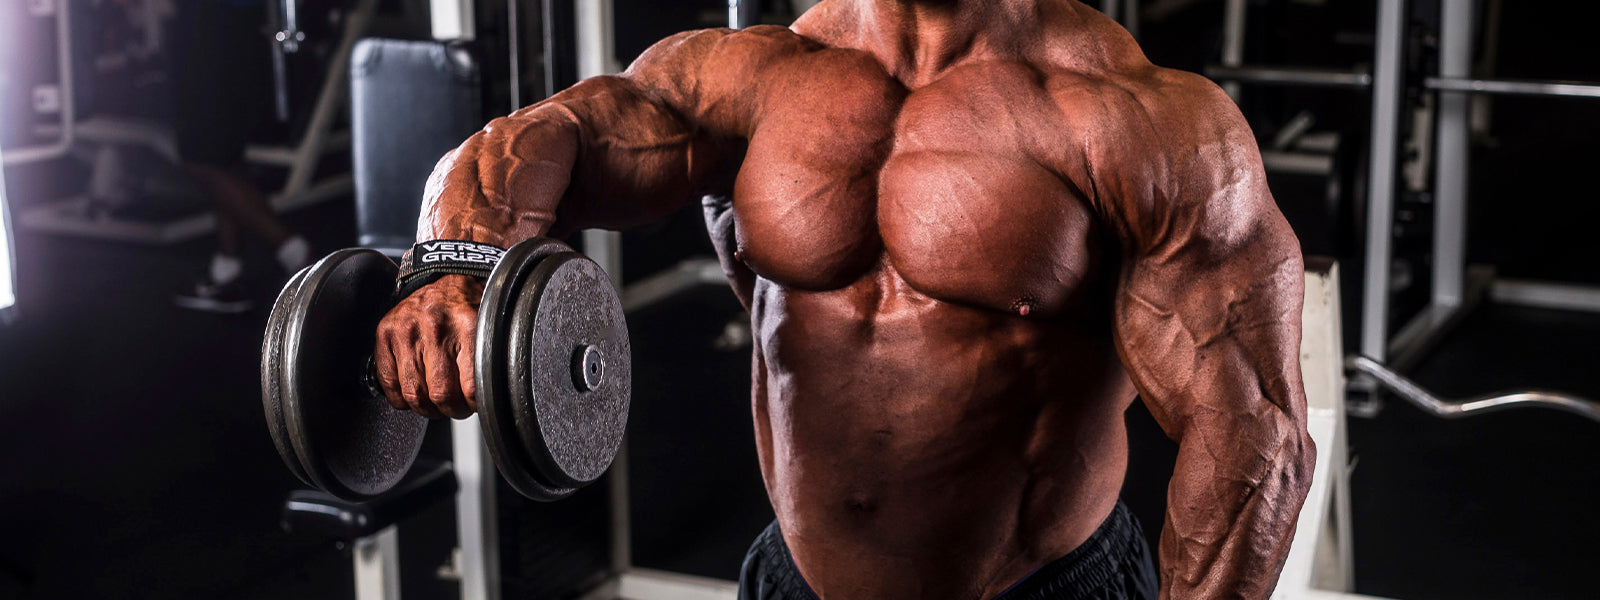 Dumbbell Front Raises Are Not a Good Way to Train Front Delts